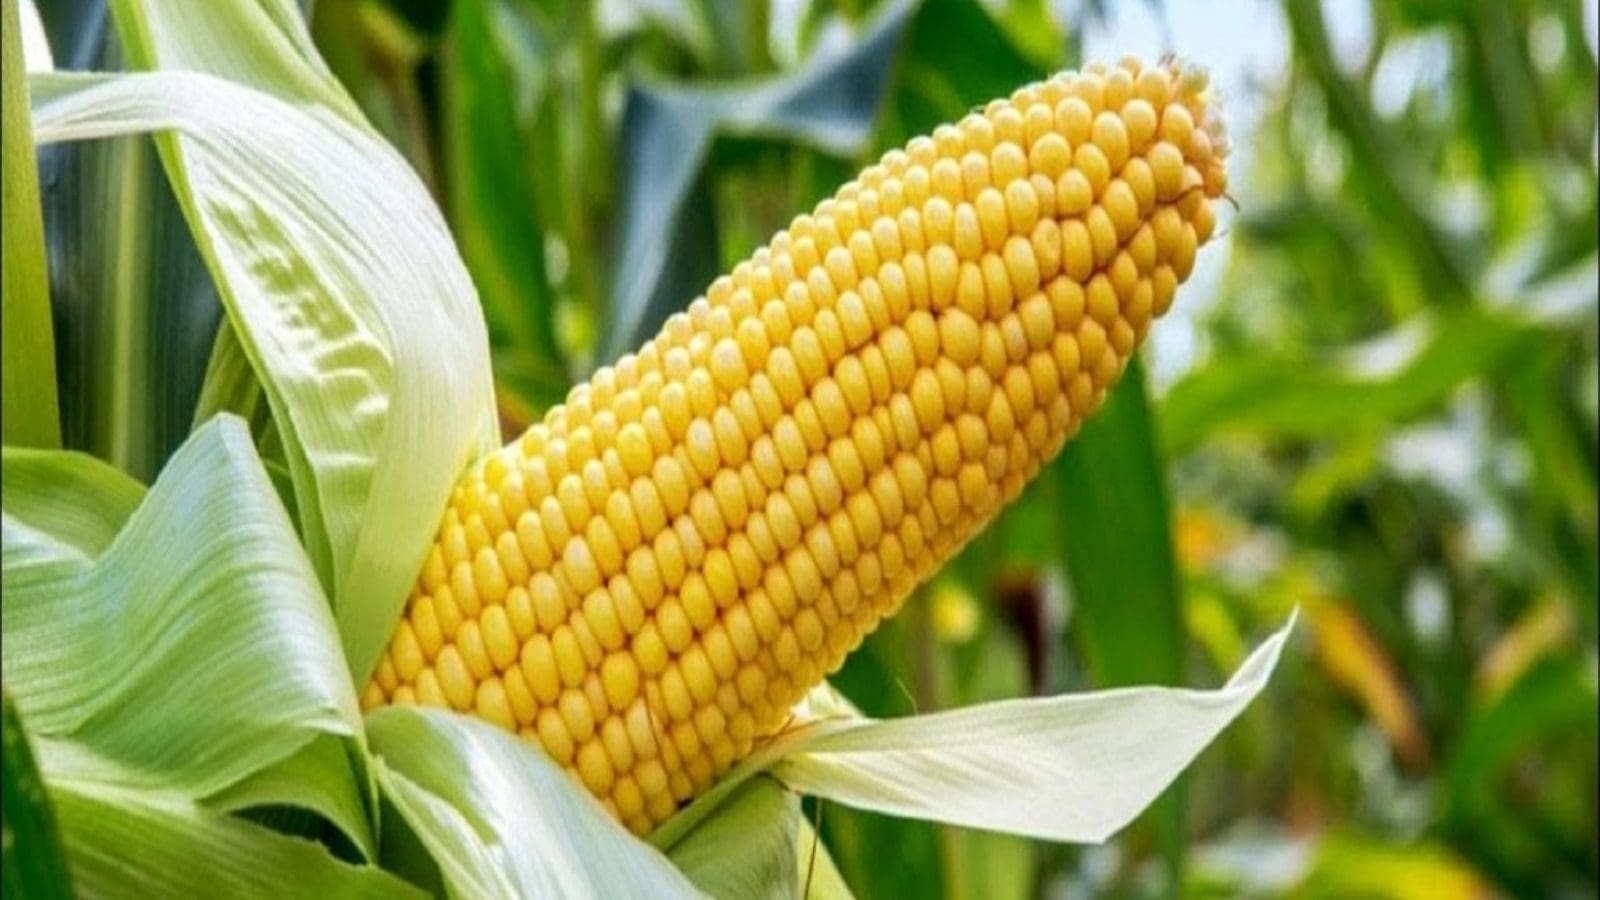 Kenya’s maize production falls by over 10M bags in five years: KNBS